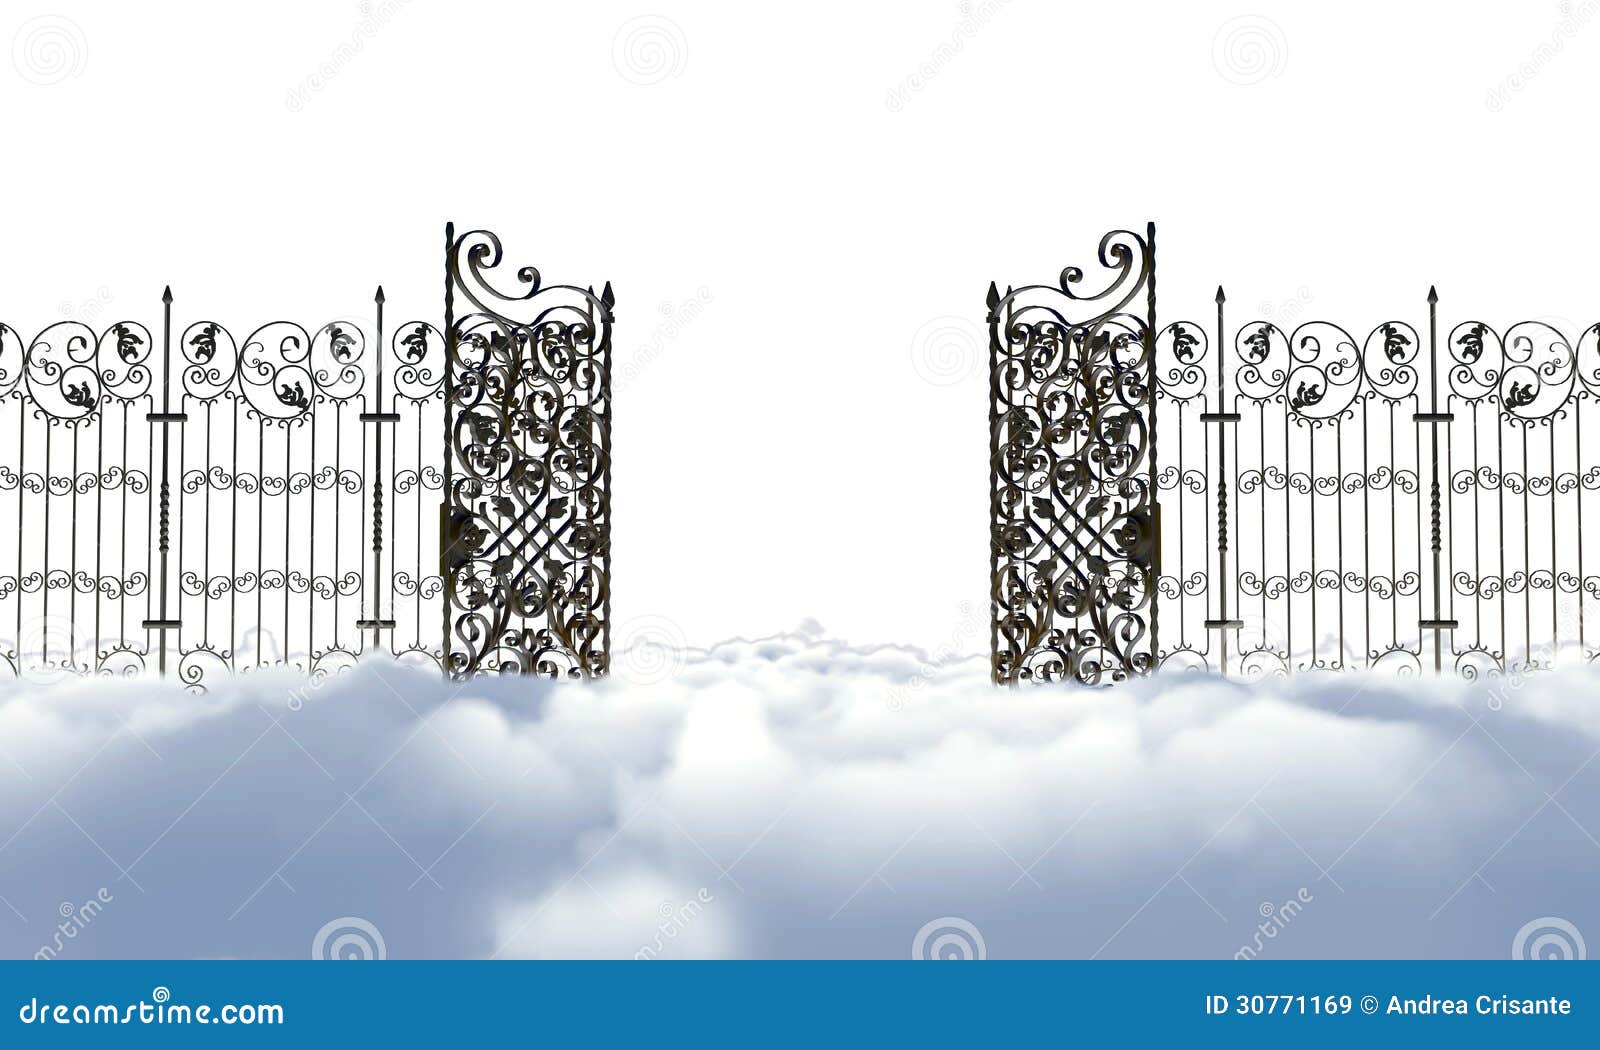 clipart of heaven's gate - photo #7